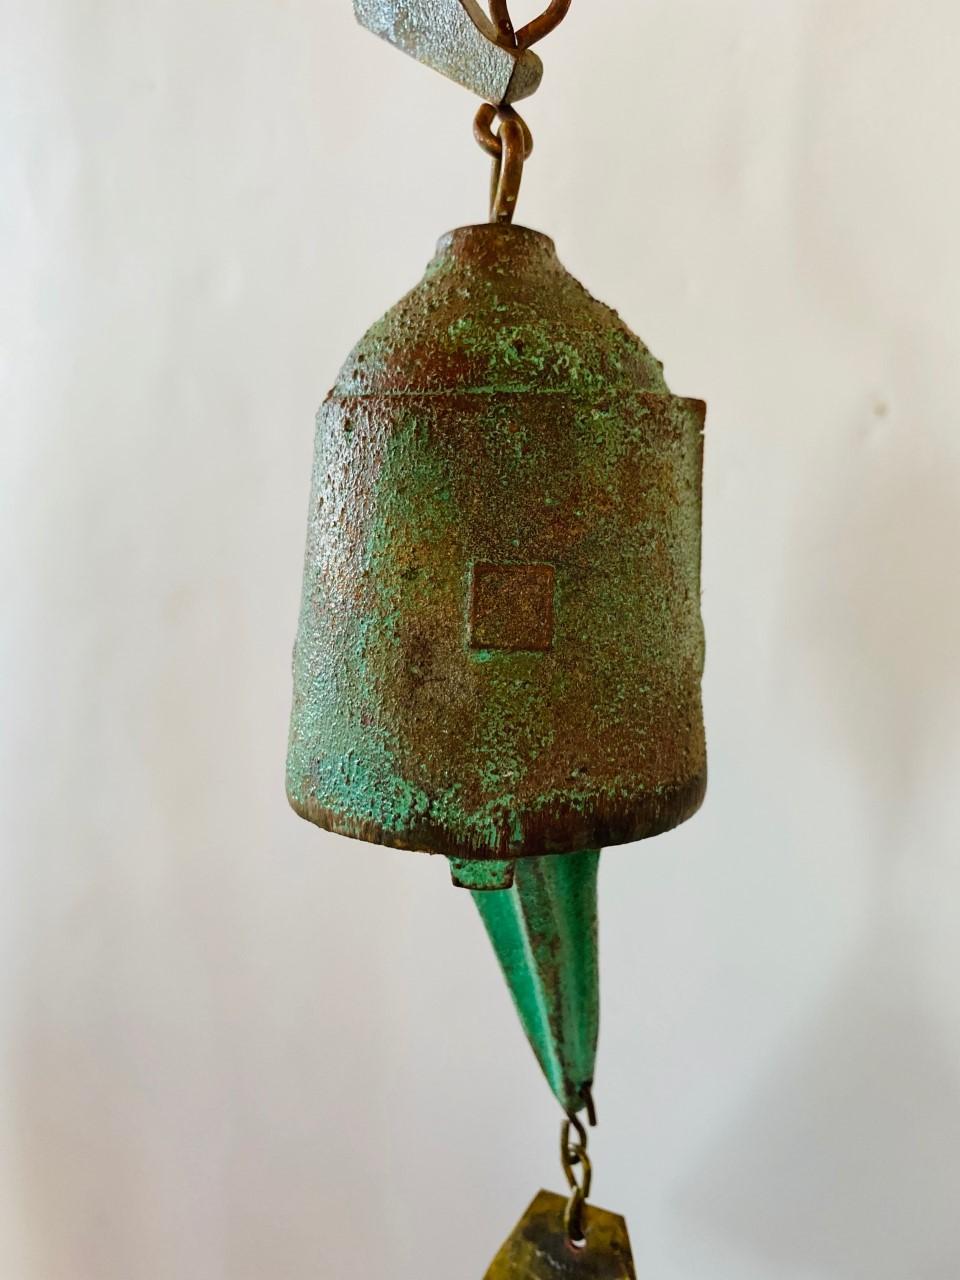 North American Beautiful Vintage Bronze Bell by Paolo Soleri